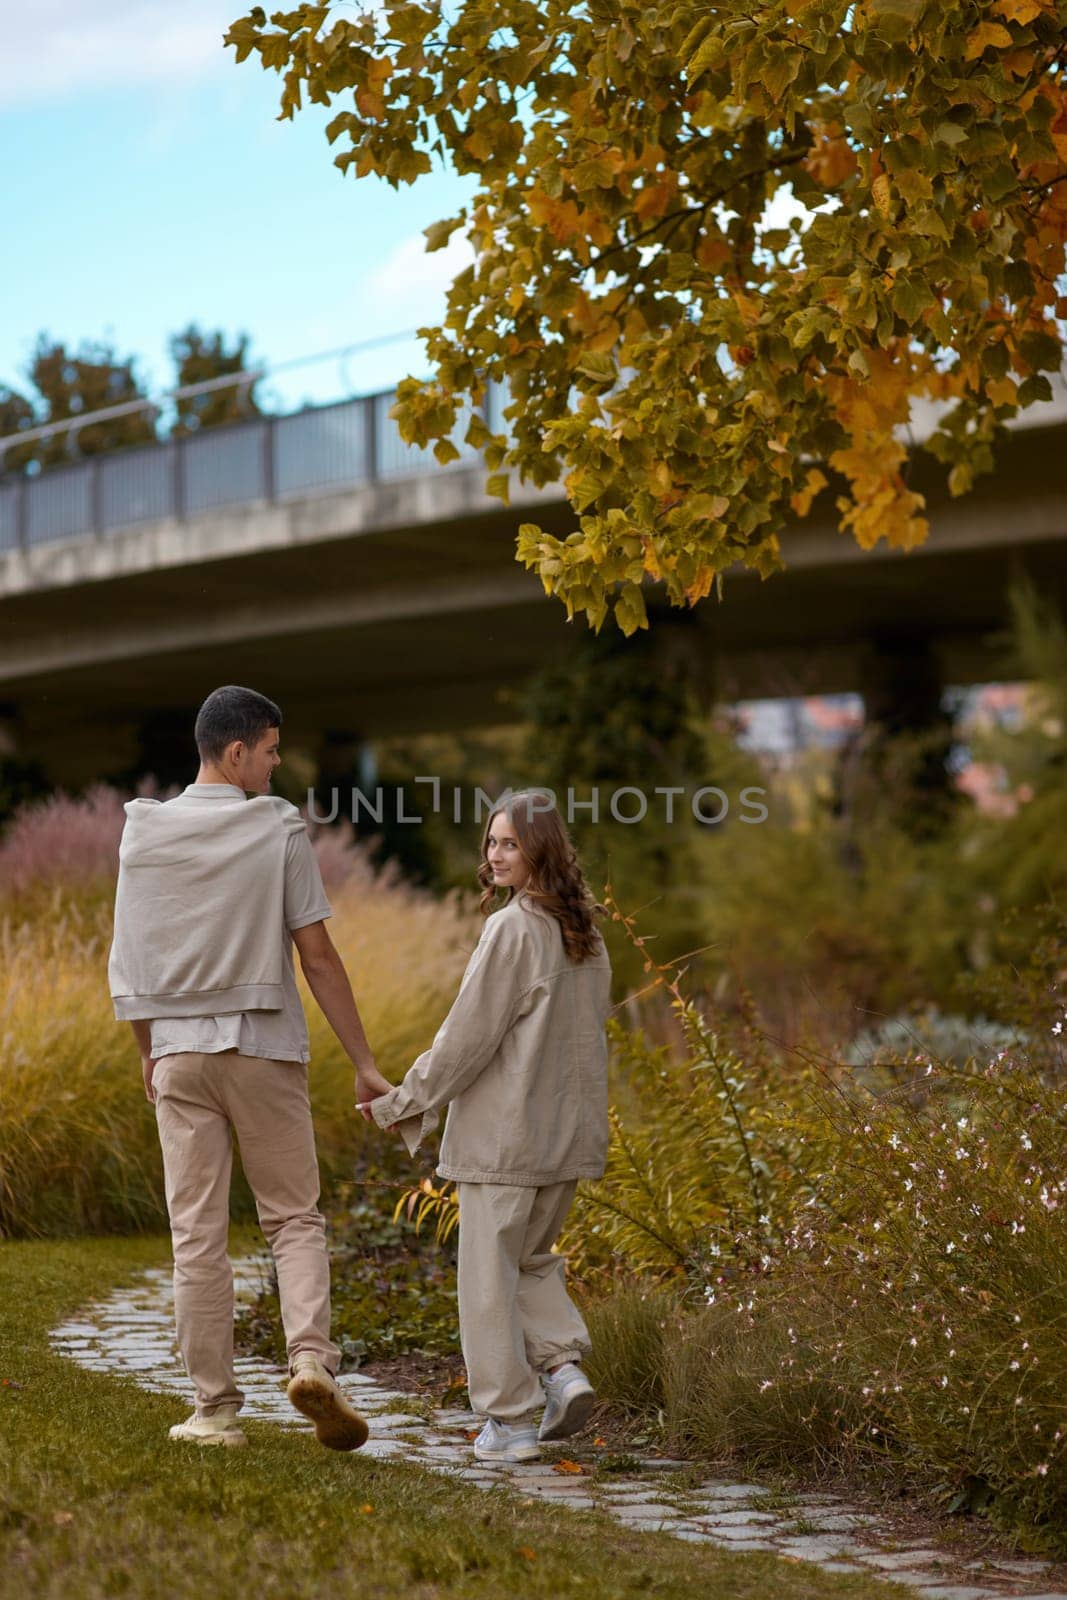 Autumn Affection: In Love, Strolling Hand in Hand through the Park. by Andrii_Ko